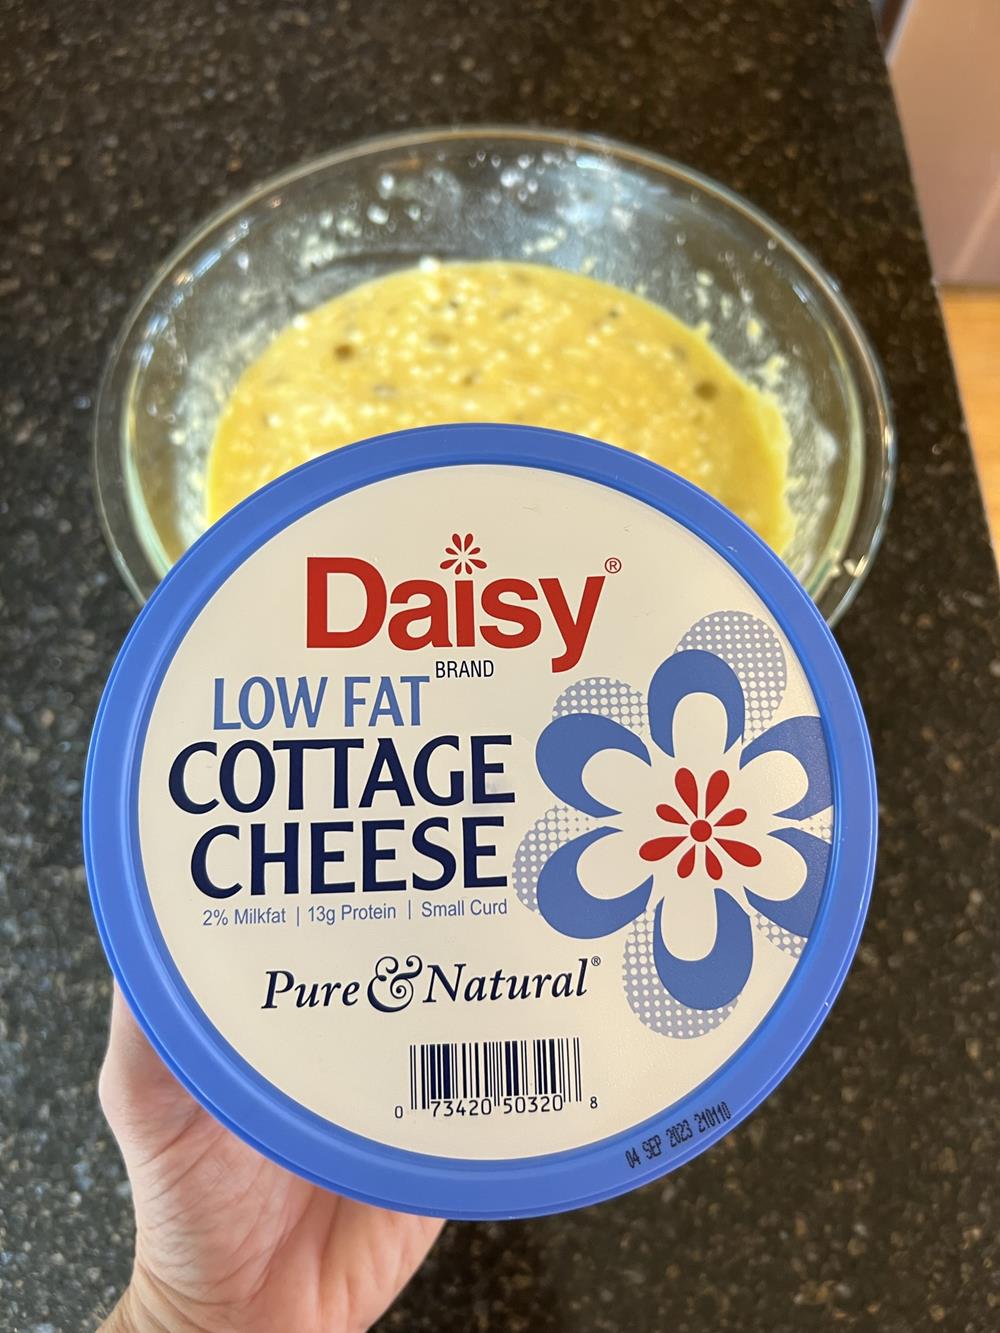 unbaked cottage cheese quiche in glass bowl with container of daisy cottage cheese